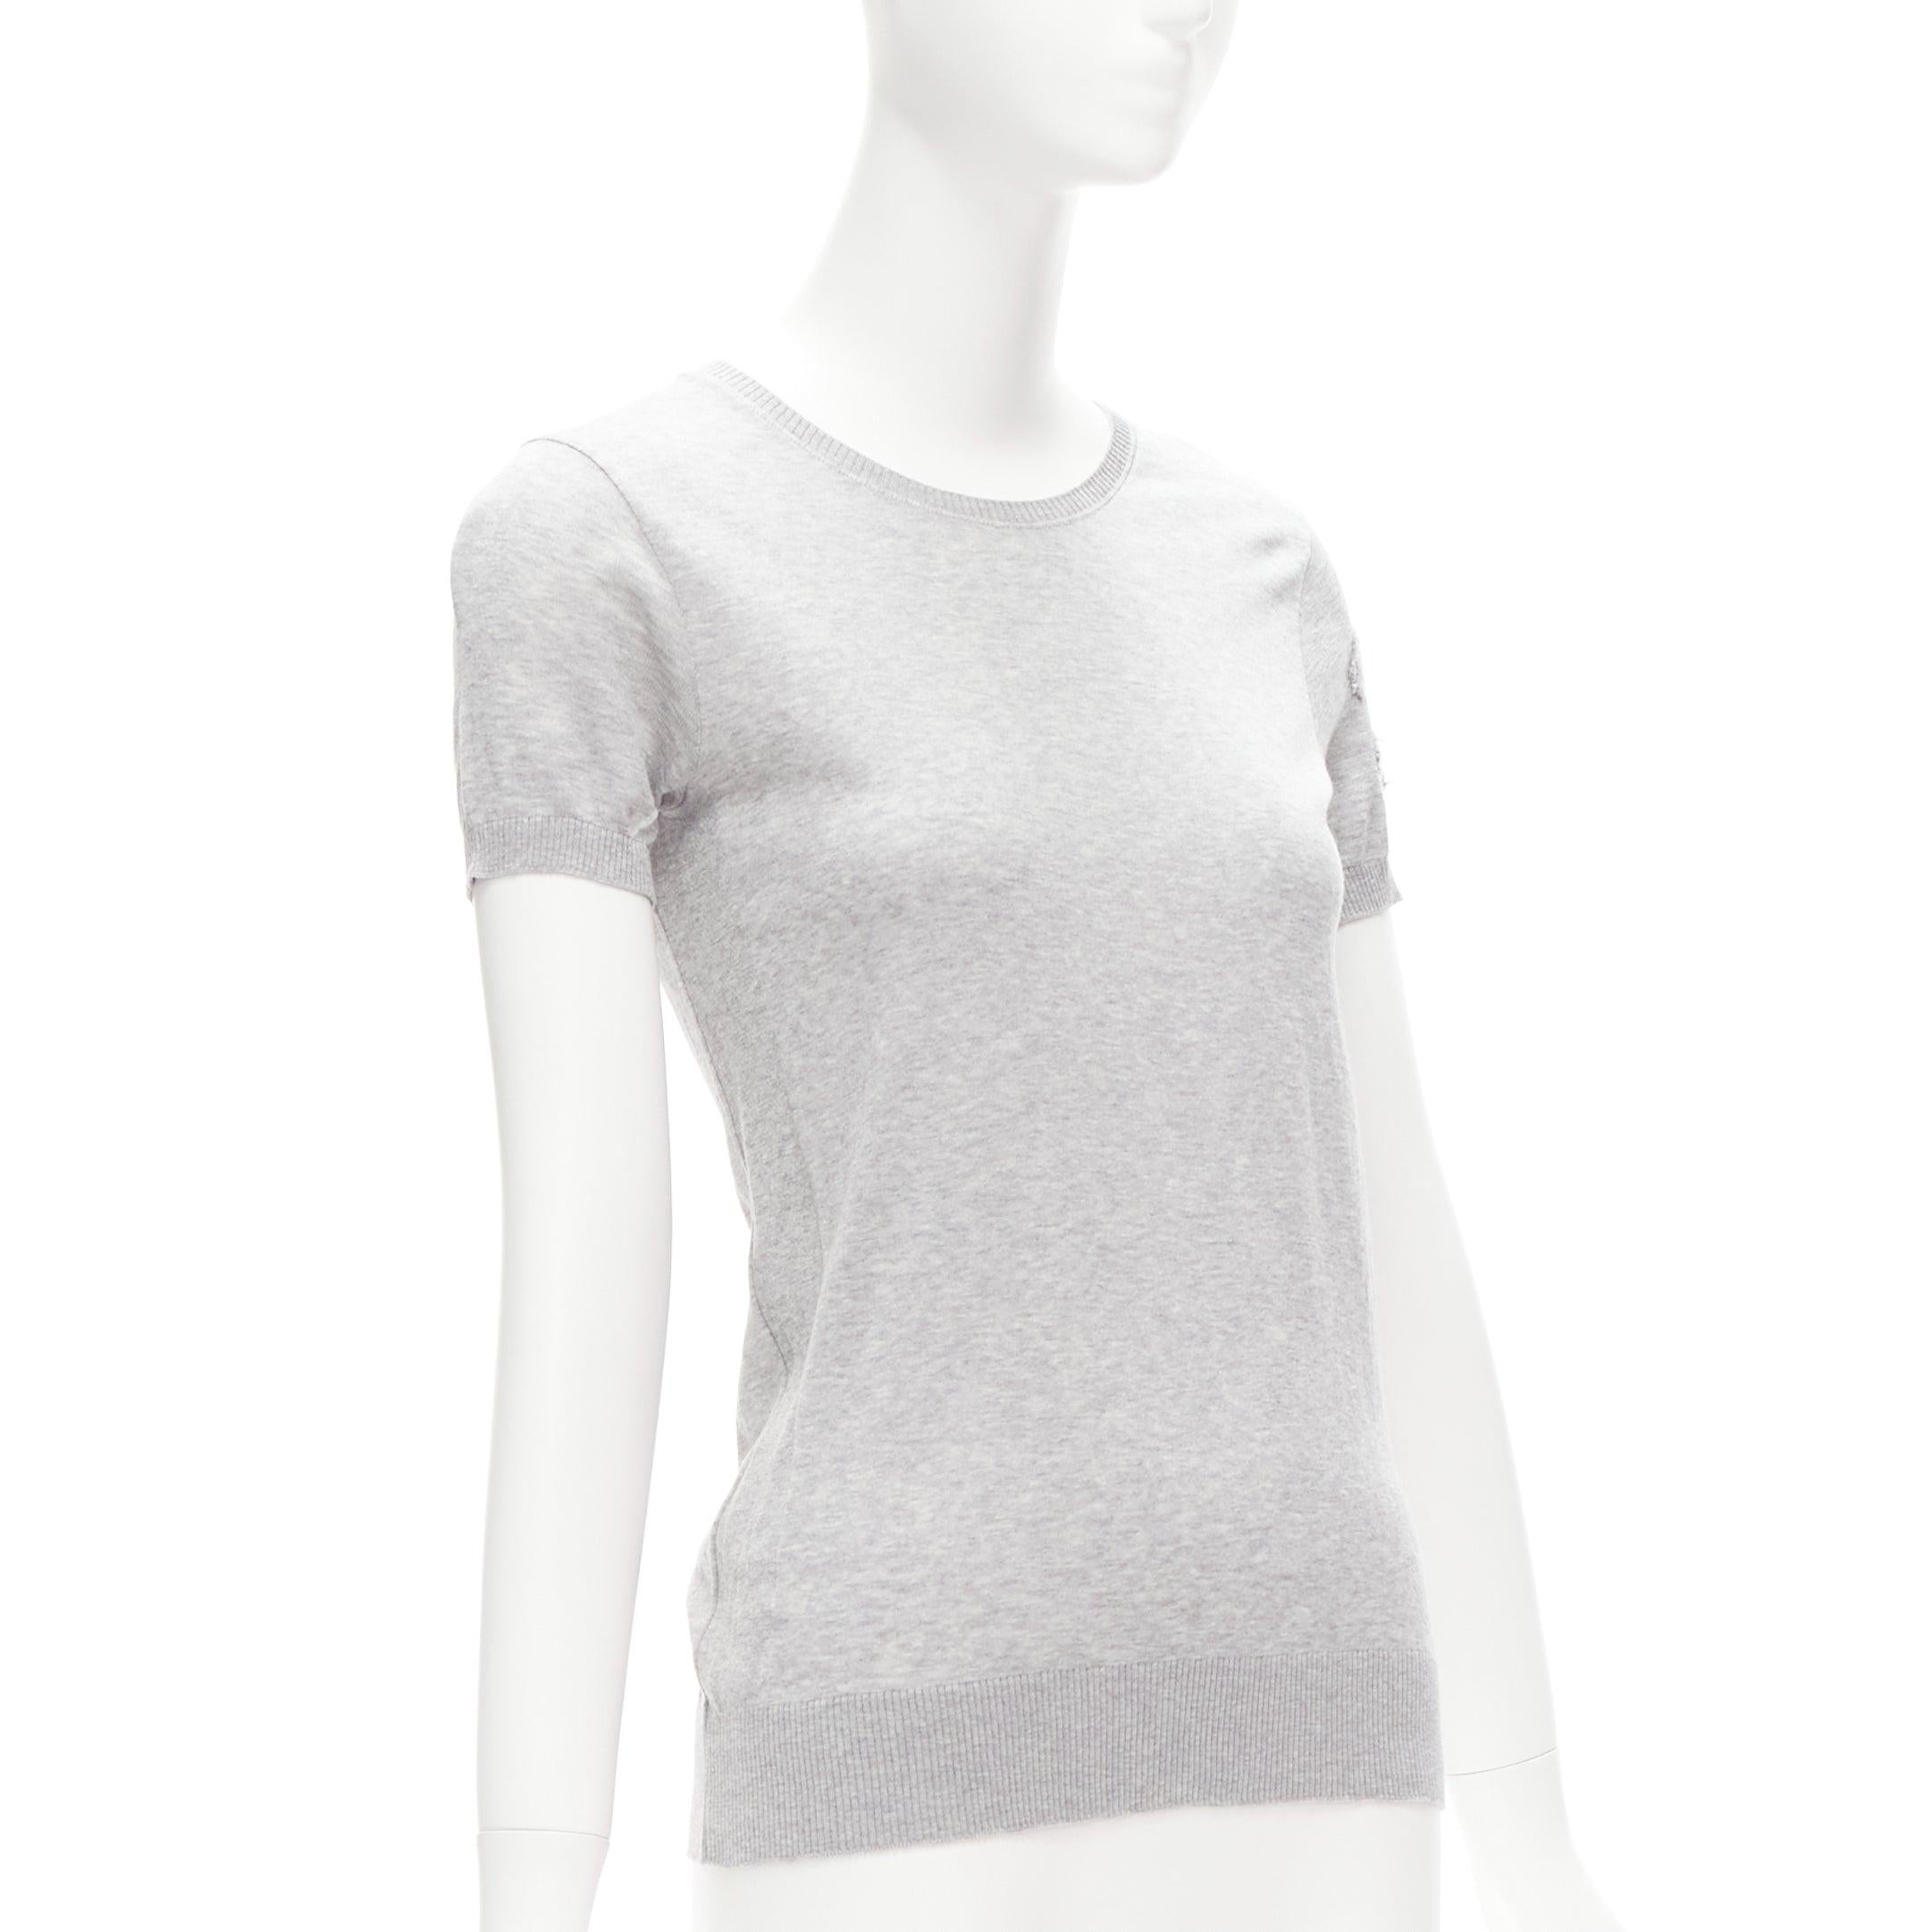 CHANEL grey 100% cotton CC logo short sleeve knitted top FR36 S
Reference: NKLL/A00067
Brand: Chanel
Material: Cotton
Color: Grey
Pattern: Solid
Closure: Slip On
Extra Details: CC logo on left sleeve.

CONDITION:
Condition: Excellent, this item was